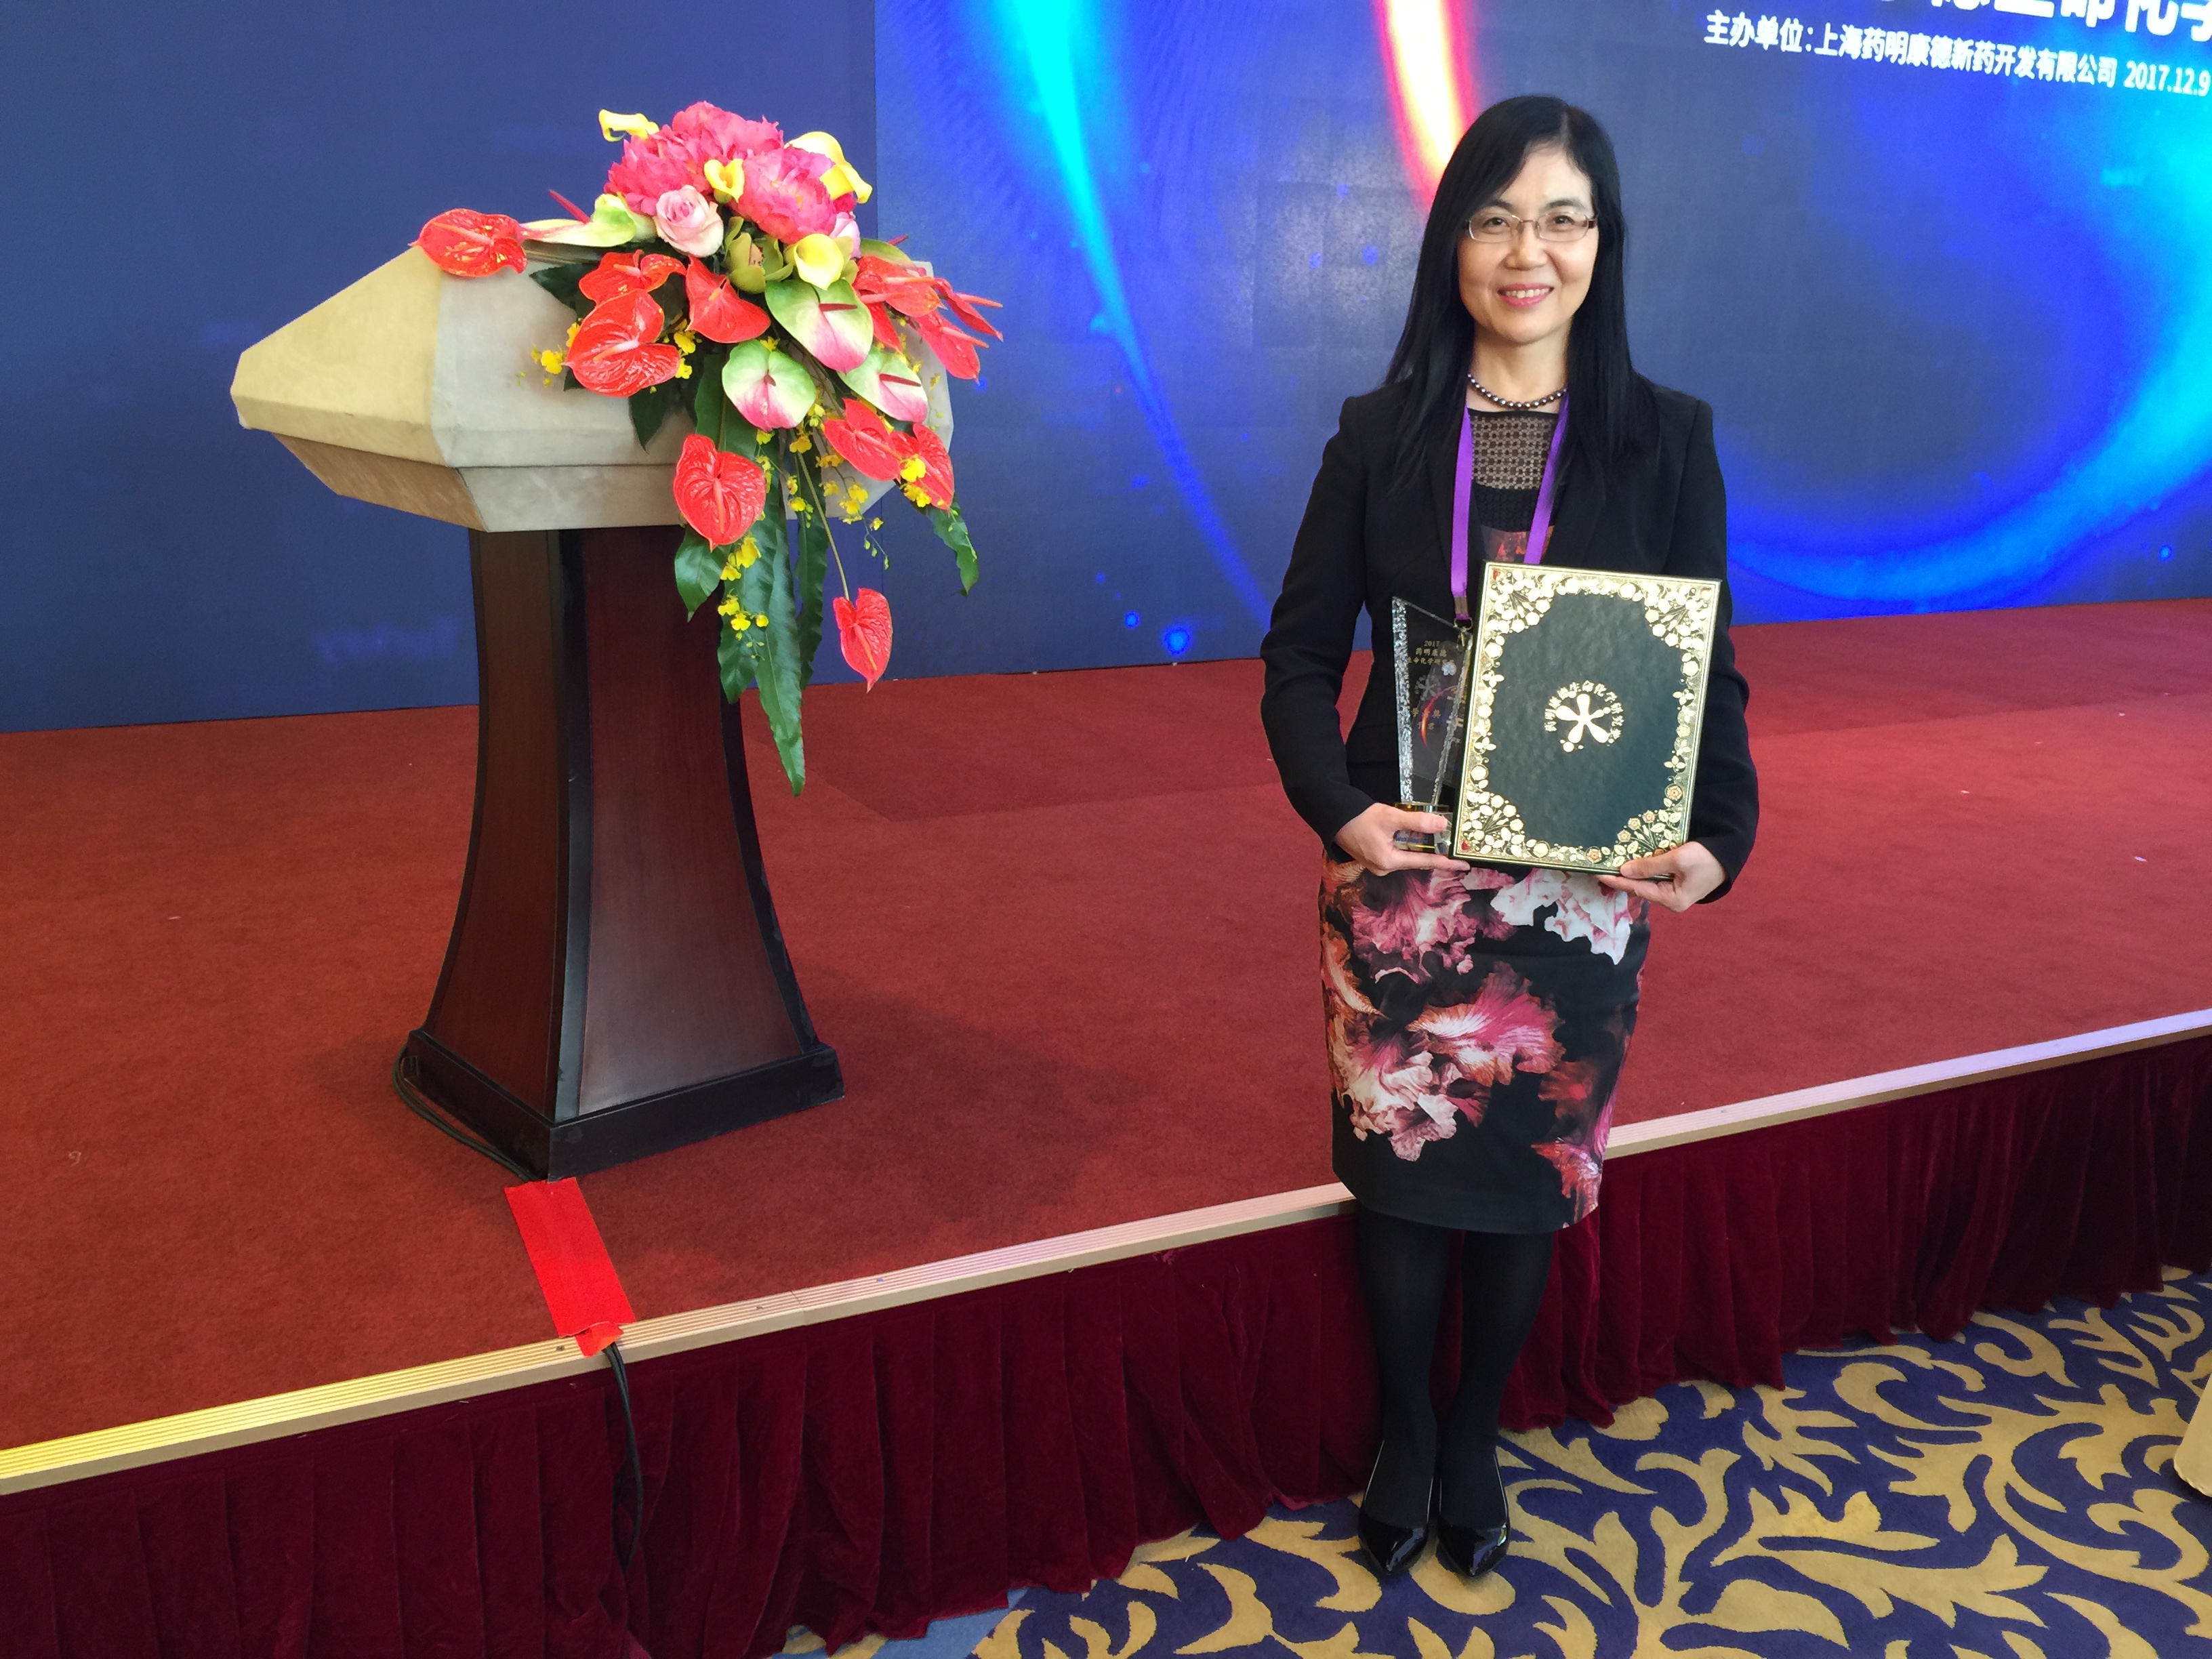 A renowned expert in gastroenterology researches, Prof. Jun YU wins Scholar Award in the 11th annual WuXi PharmaTech Life Science and Chemistry Awards for her accomplishment in molecular mechanisms research and treatment of gastrointestinal cancers.